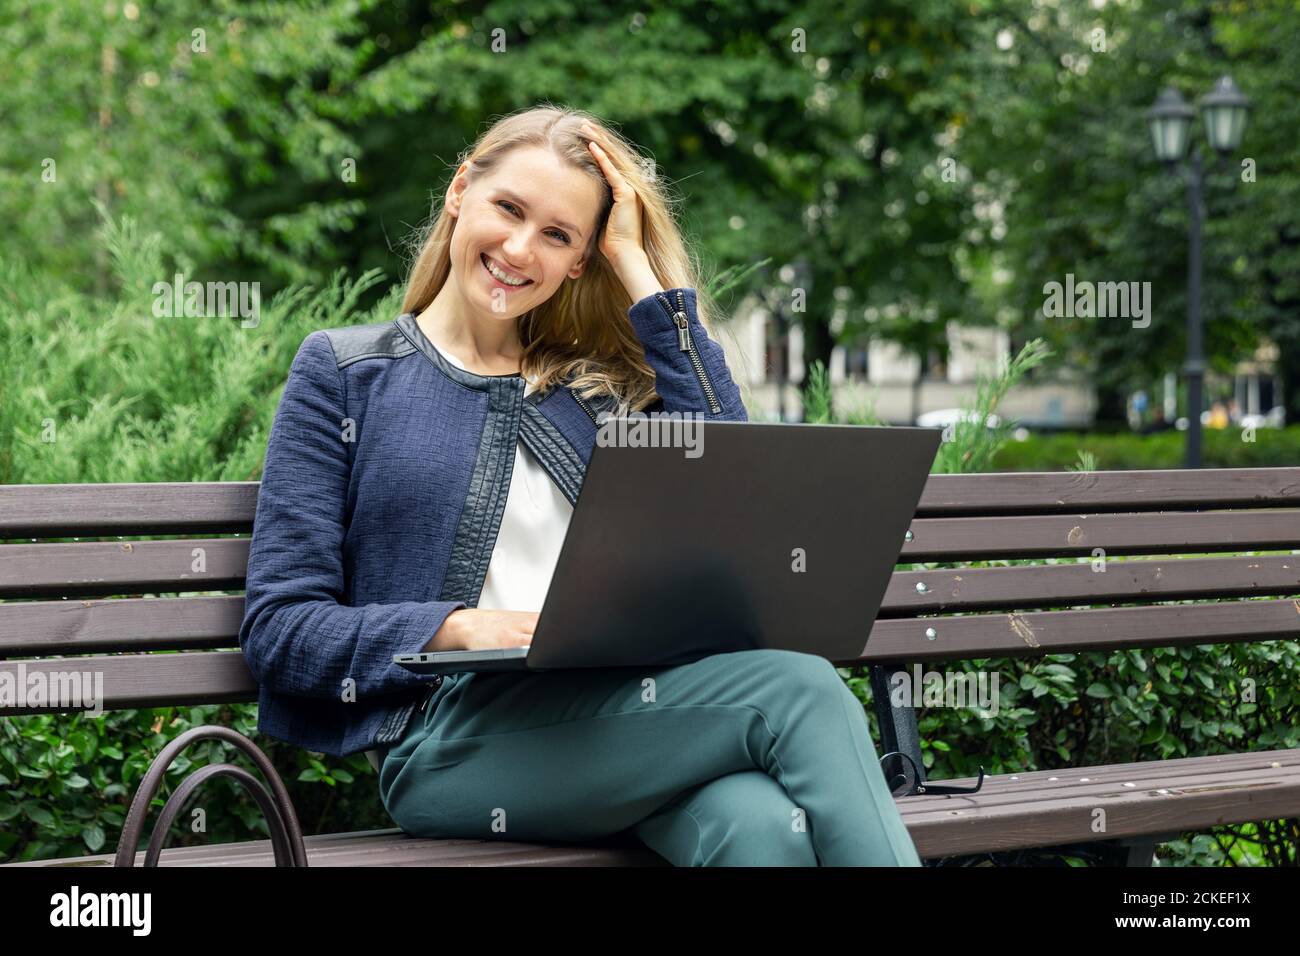 young attractive smiling woman relaxing on the bench in the city park with laptop Stock Photo